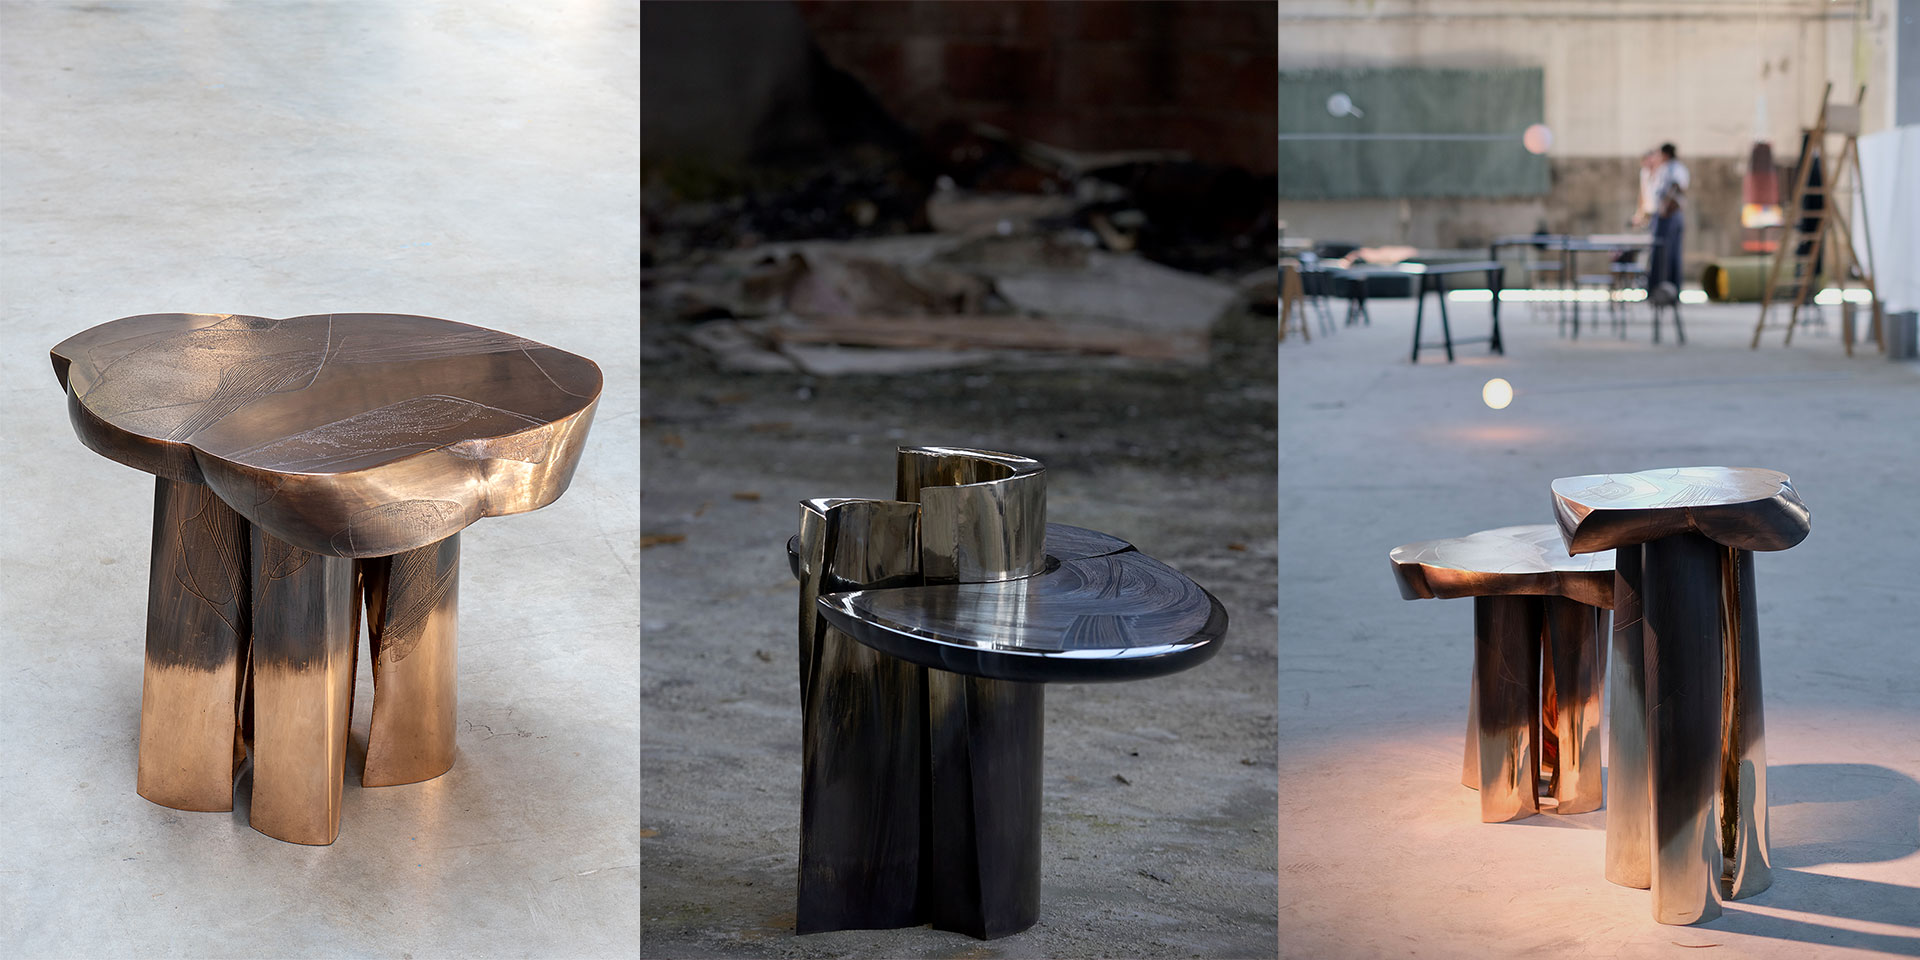 Maison Armand Jonckers mixes bronze and clay to build primitive ...